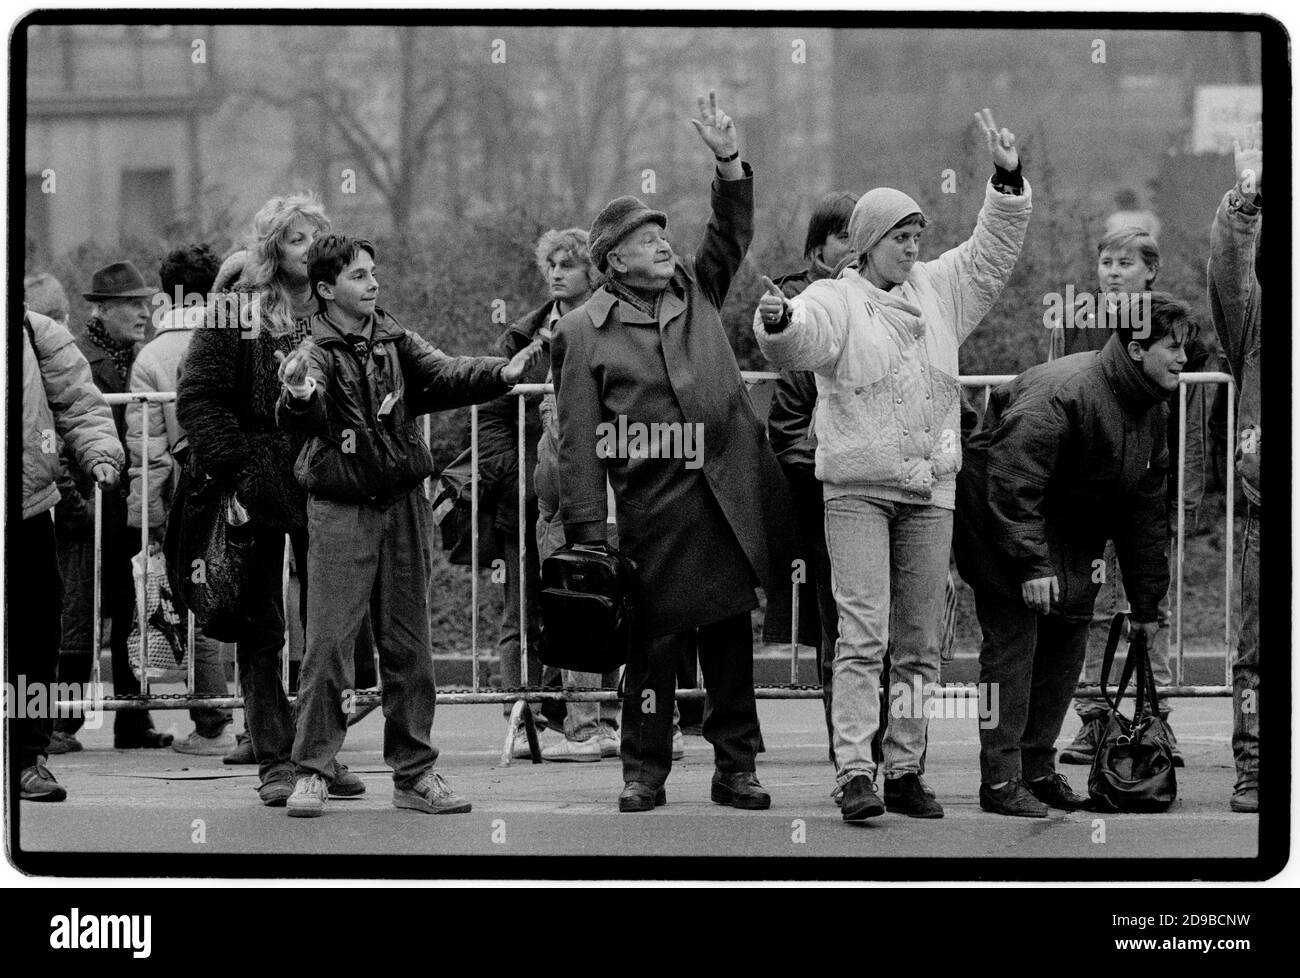 Czechoslovakia Velvet Revolution Prague November 1989 Scanned in 2020 Celebrating and supporting the thousands of protesters in Wenceslas Square during the Velvet Revolution. Wikipedia: The Velvet Revolution (Czech: sametová revoluce) or Gentle Revolution (Slovak: nežná revolúcia) was a non-violent transition of power in what was then Czechoslovakia, occurring from 17 November to 29 December 1989. Popular demonstrations against the one-party government of the Communist Party of Czechoslovakia included students and older dissidents. The result was the end of 41 years of one-party rule in Czecho Stock Photo